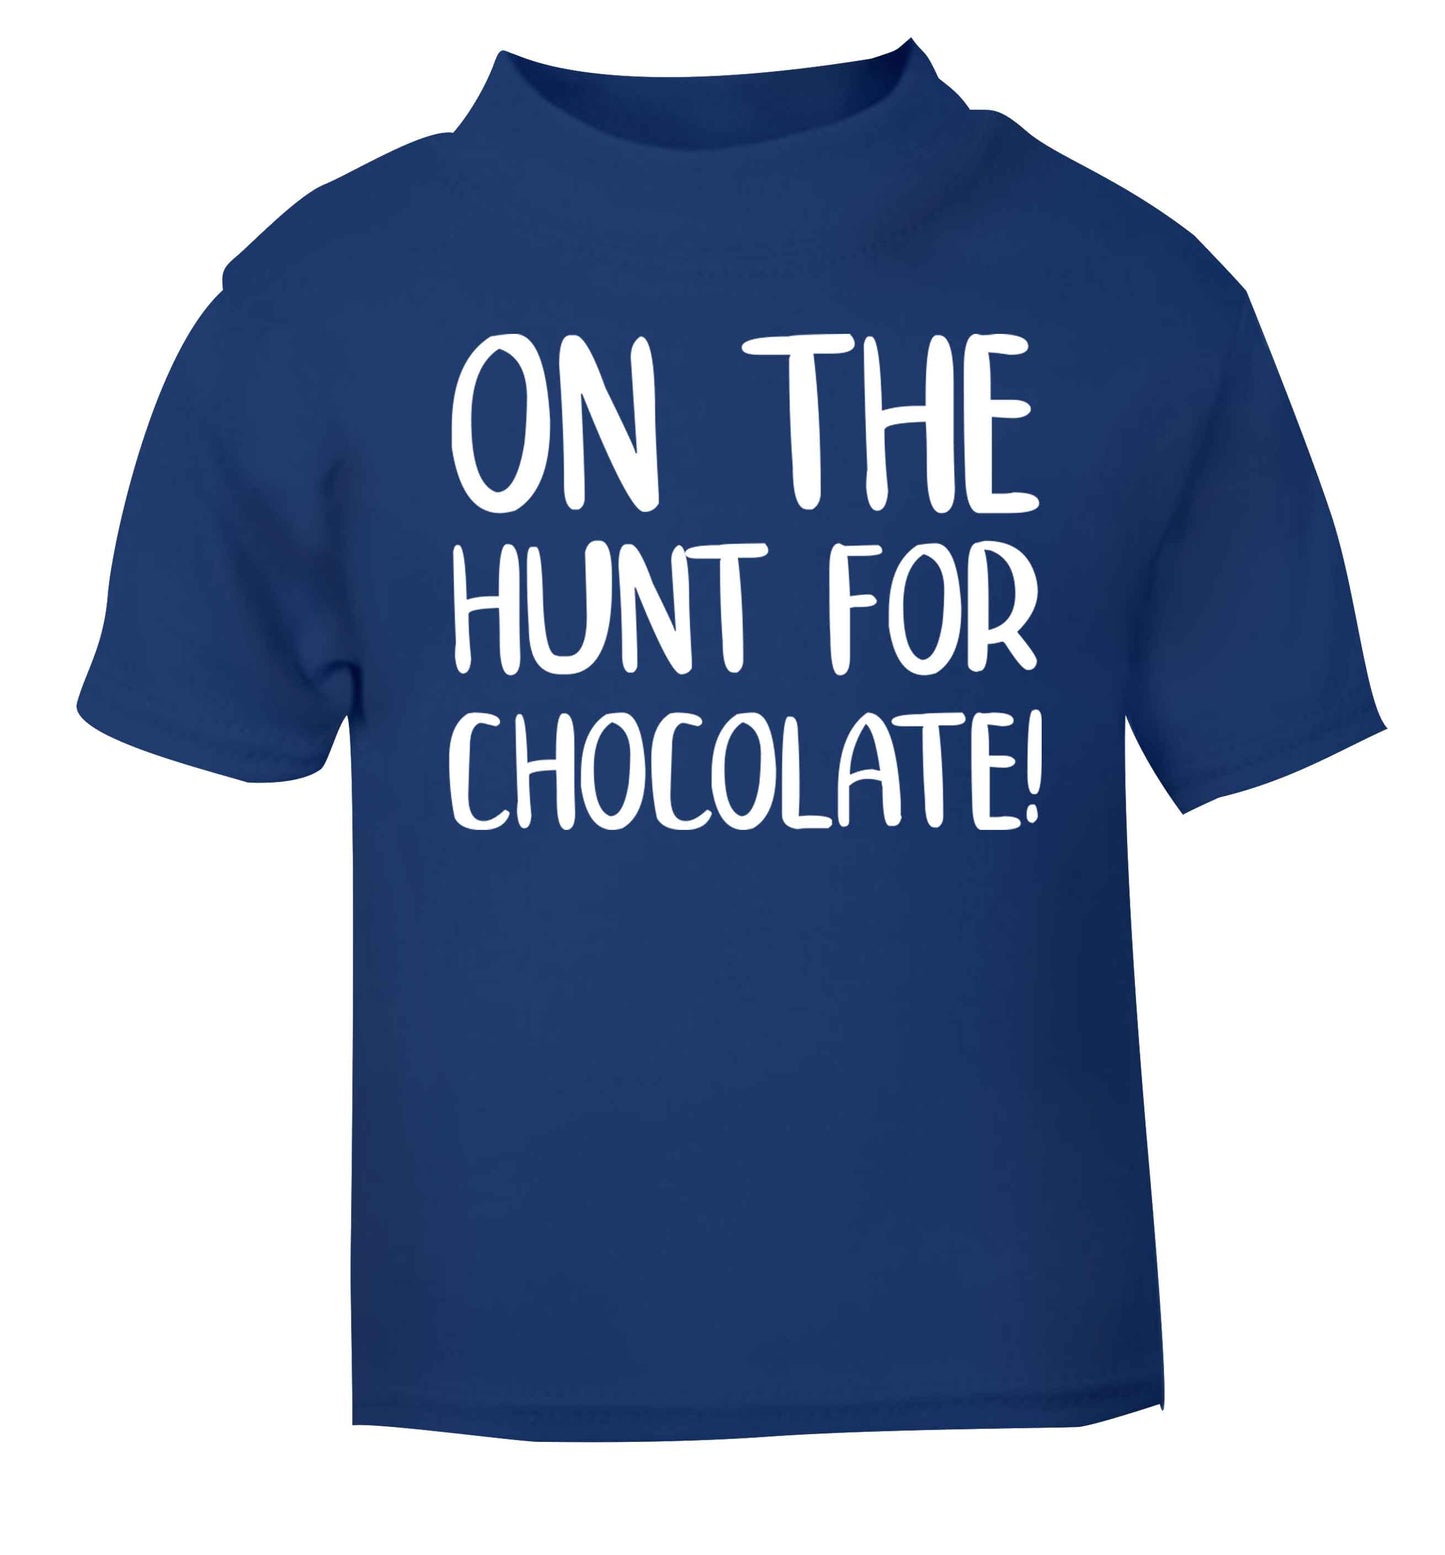 On the hunt for chocolate! blue baby toddler Tshirt 2 Years